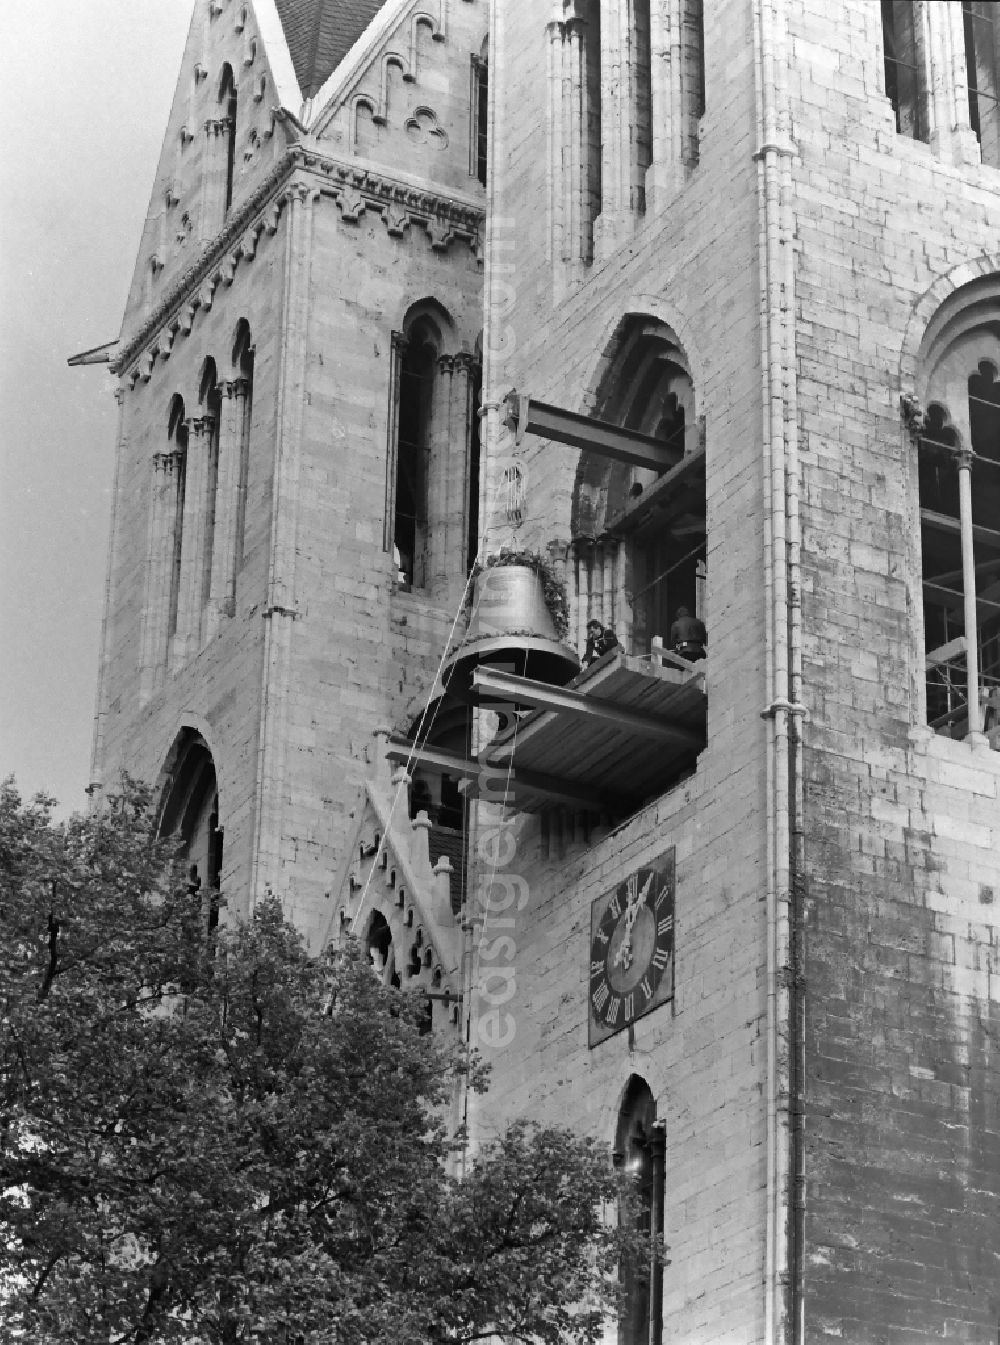 GDR image archive: Halberstadt - Elevation of the cast bell Domina on the west facade of the cathedral - facade of the sacral building St. Stephanus and St. Sixtus on Domplatz in Halberstadt in the state Saxony-Anhalt in Germany